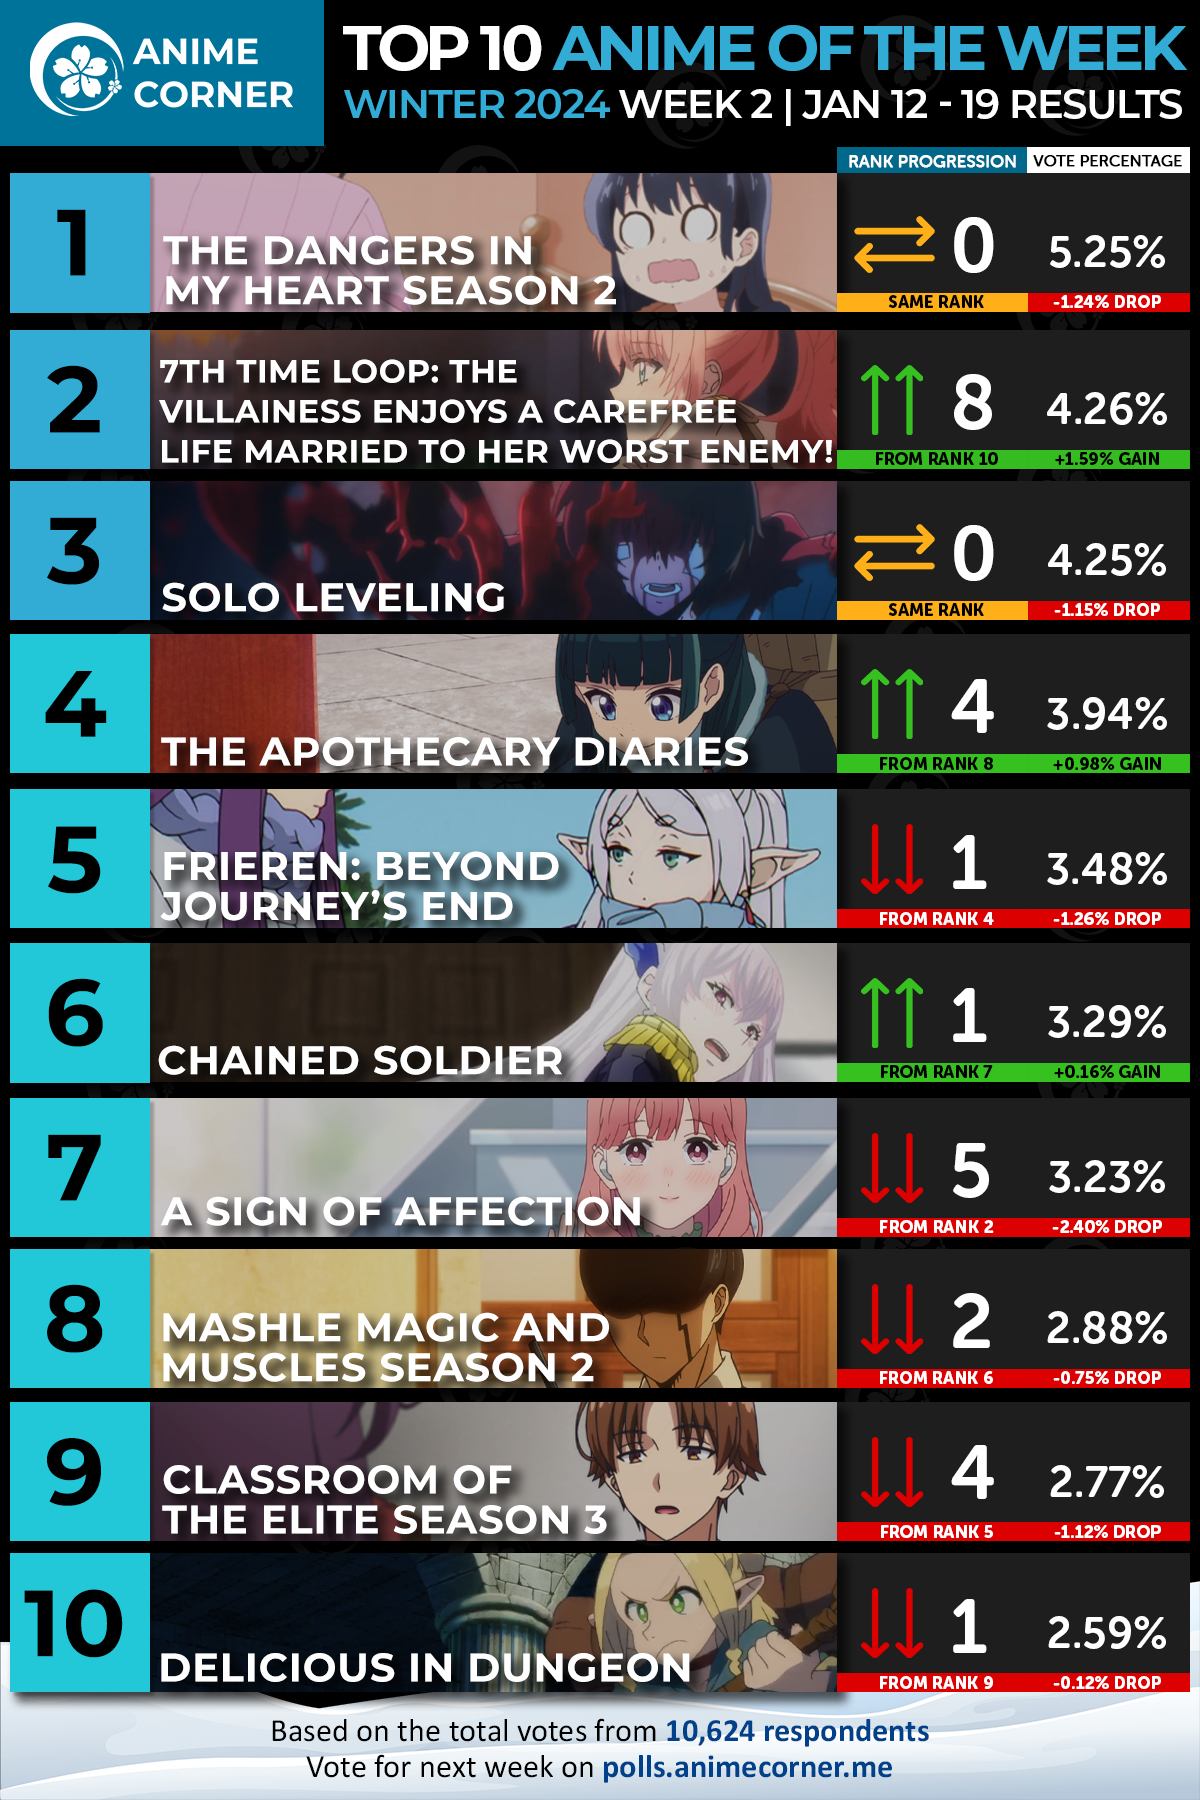 Dangerous Heart season 2 topped the anime rankings for the first week 2